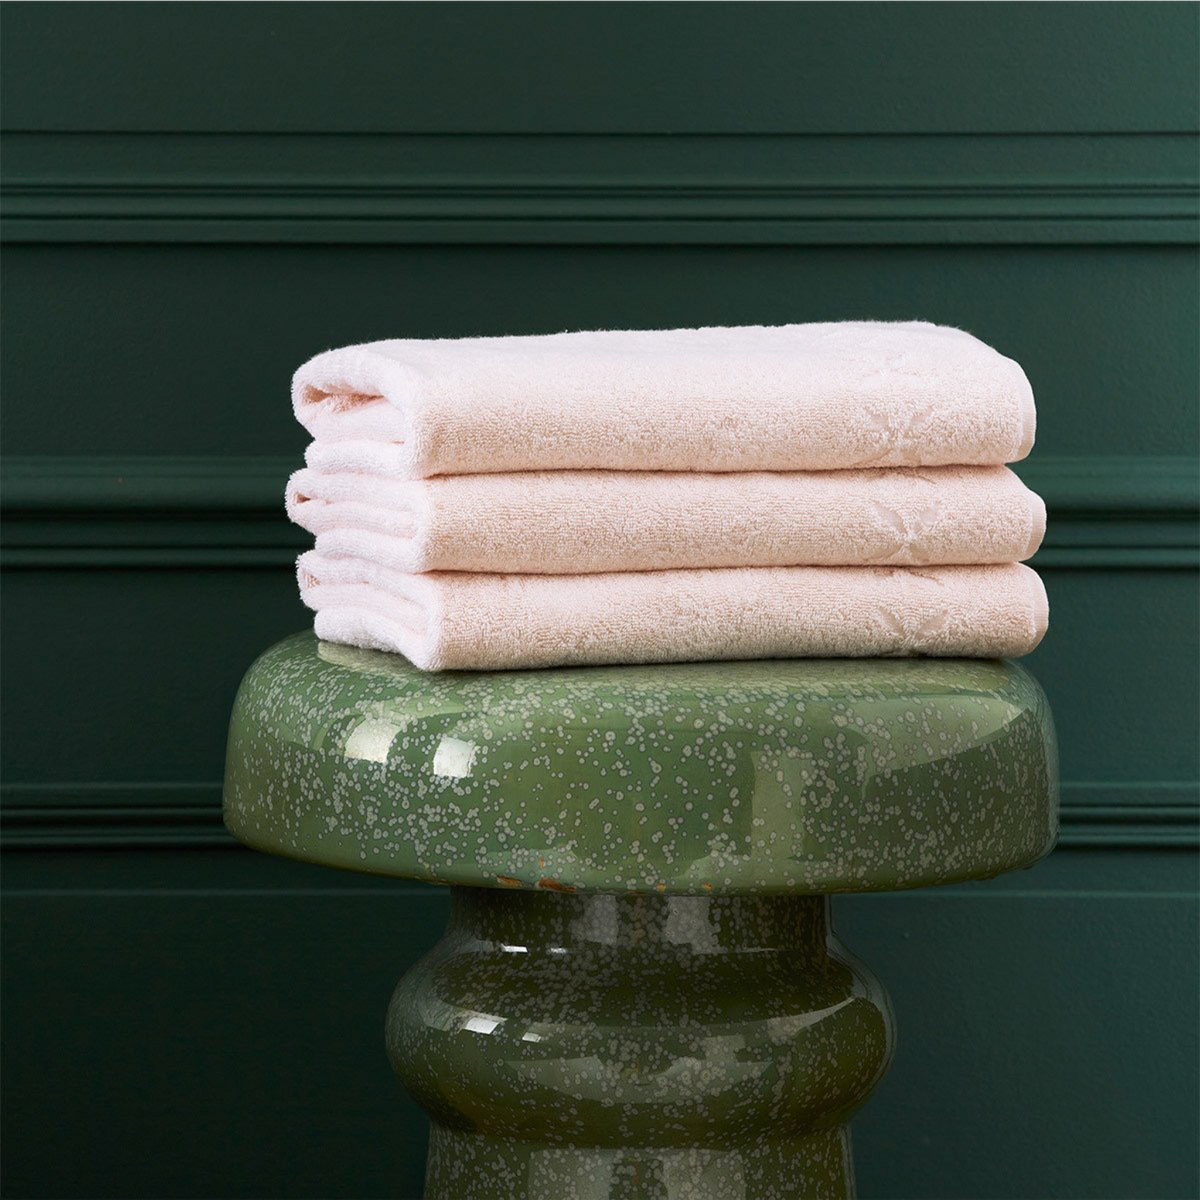 Lifestyle Image of Stack of Folded Yves Delorme Nature Bath Linens in Poudre Color